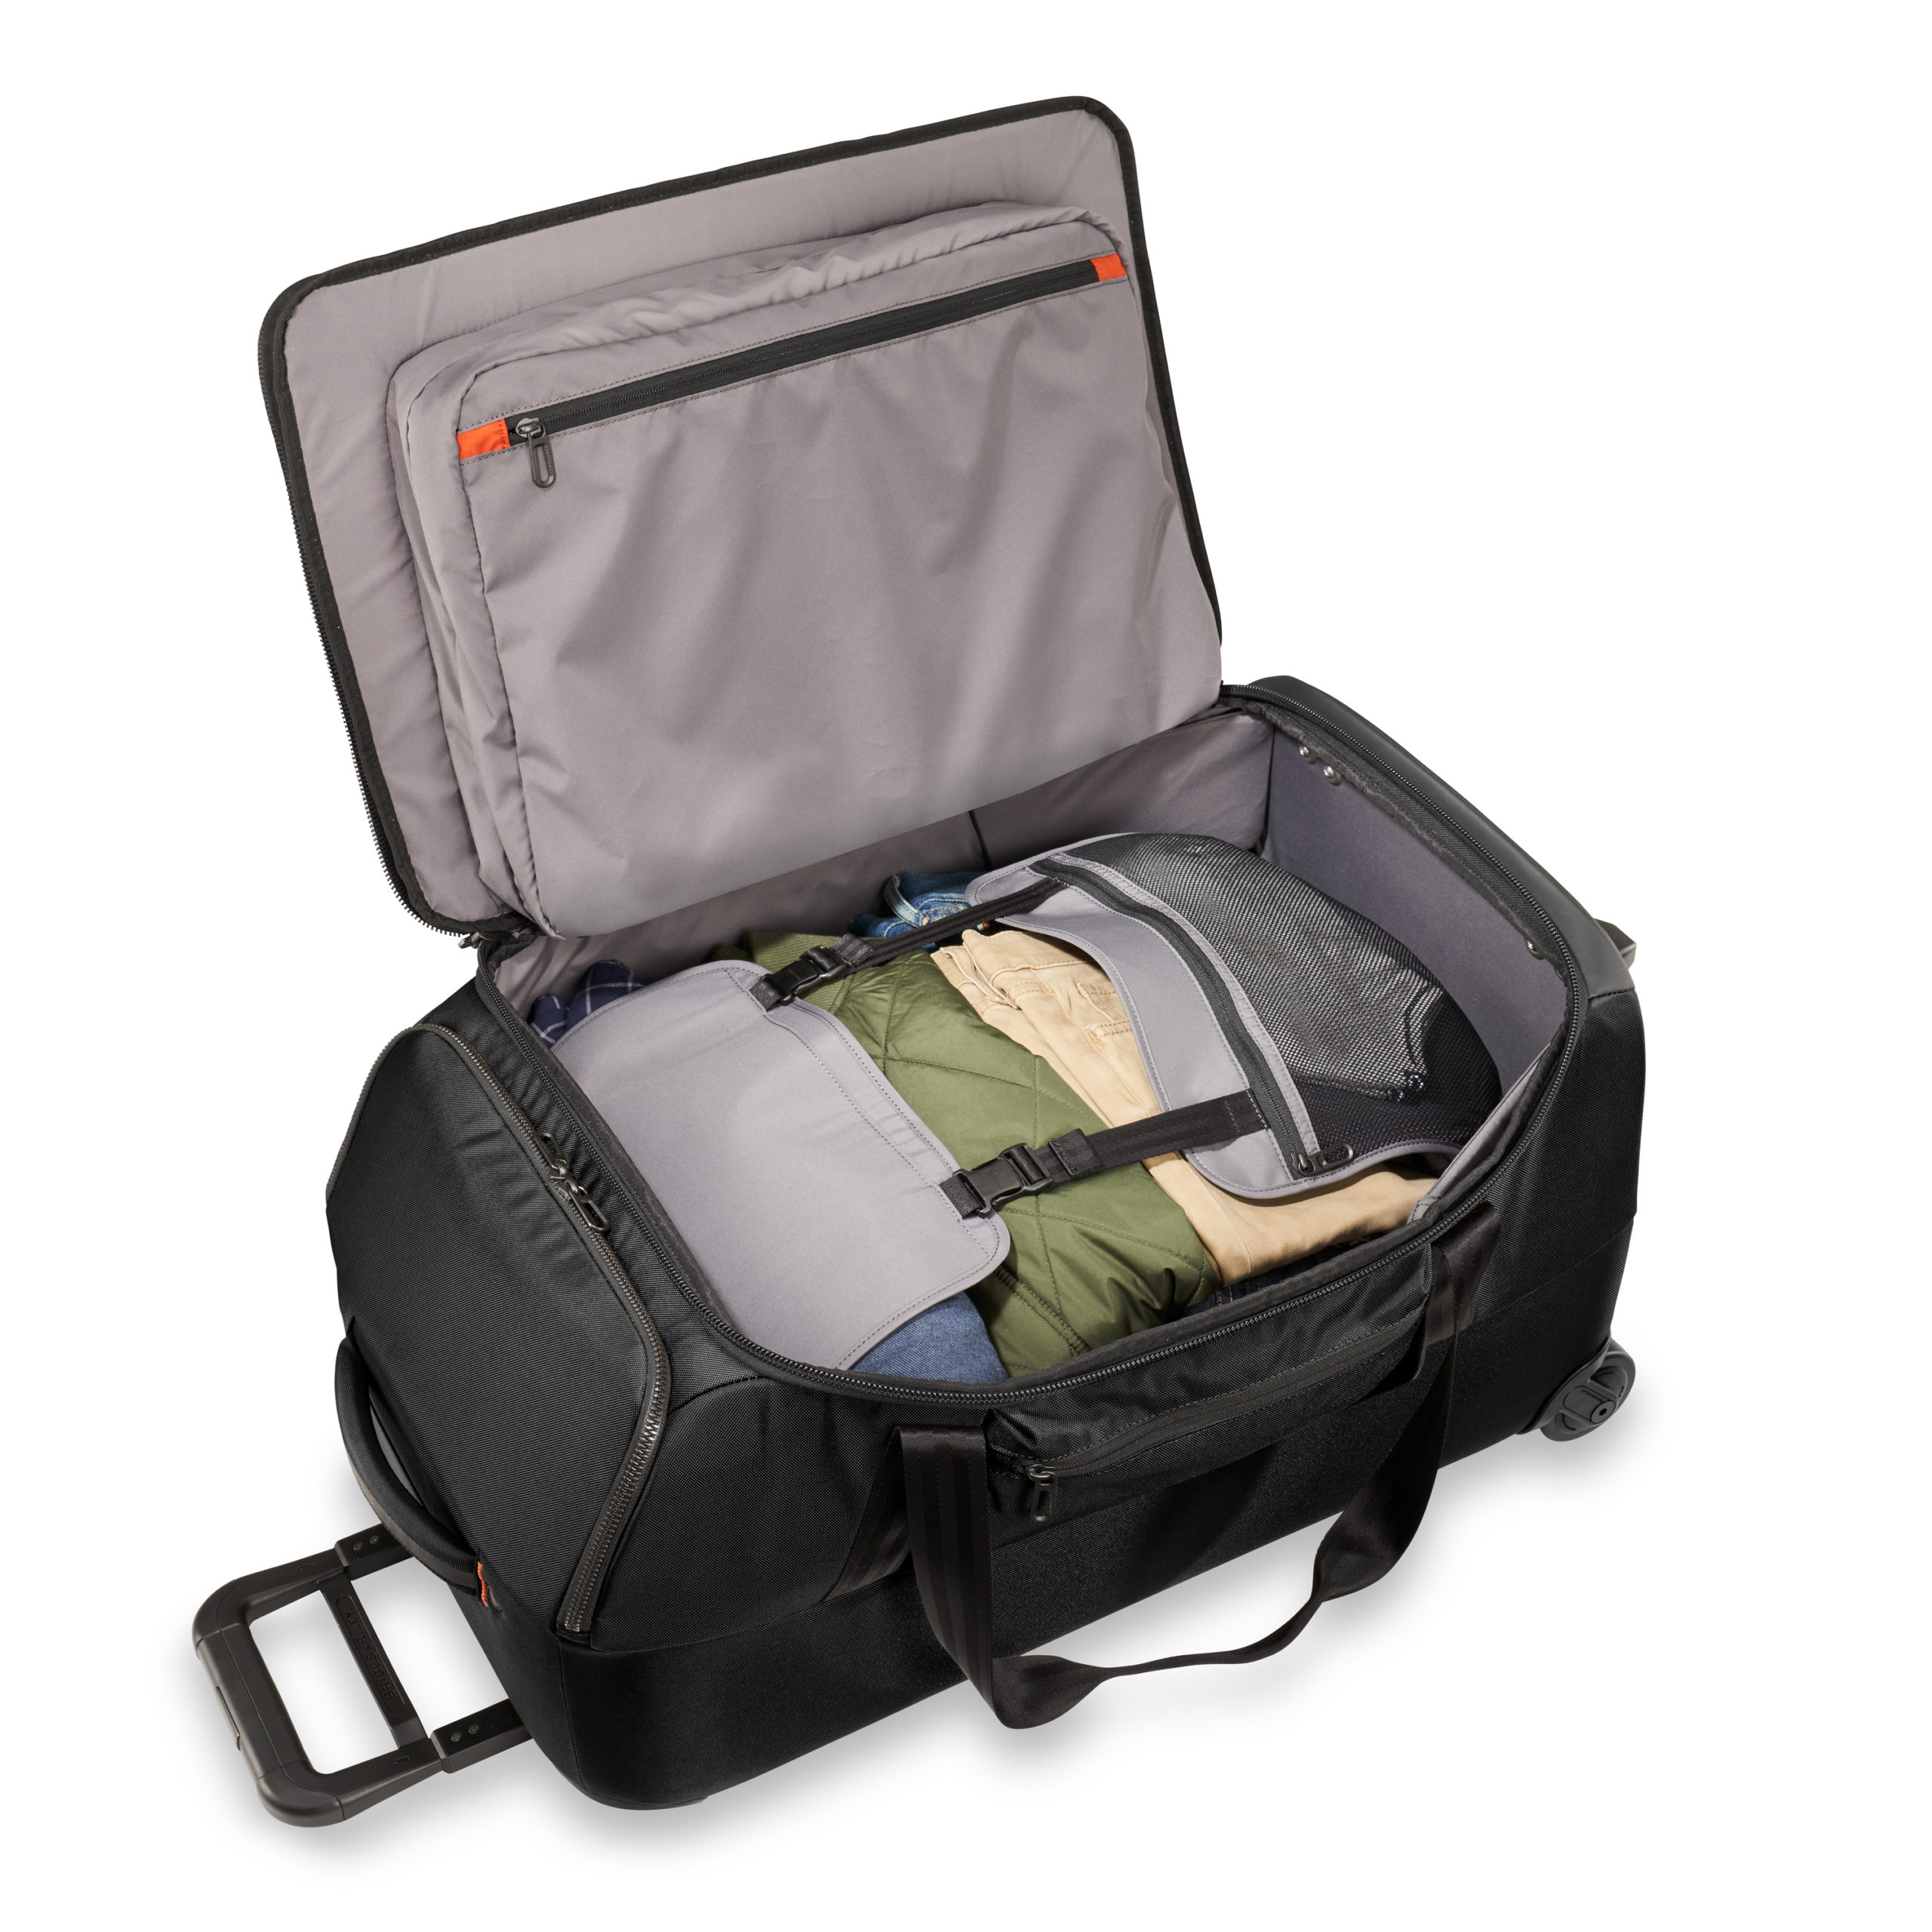 Do Briggs & Riley Bags Attach to Other Luggage Brands? - Luggage Unpacked